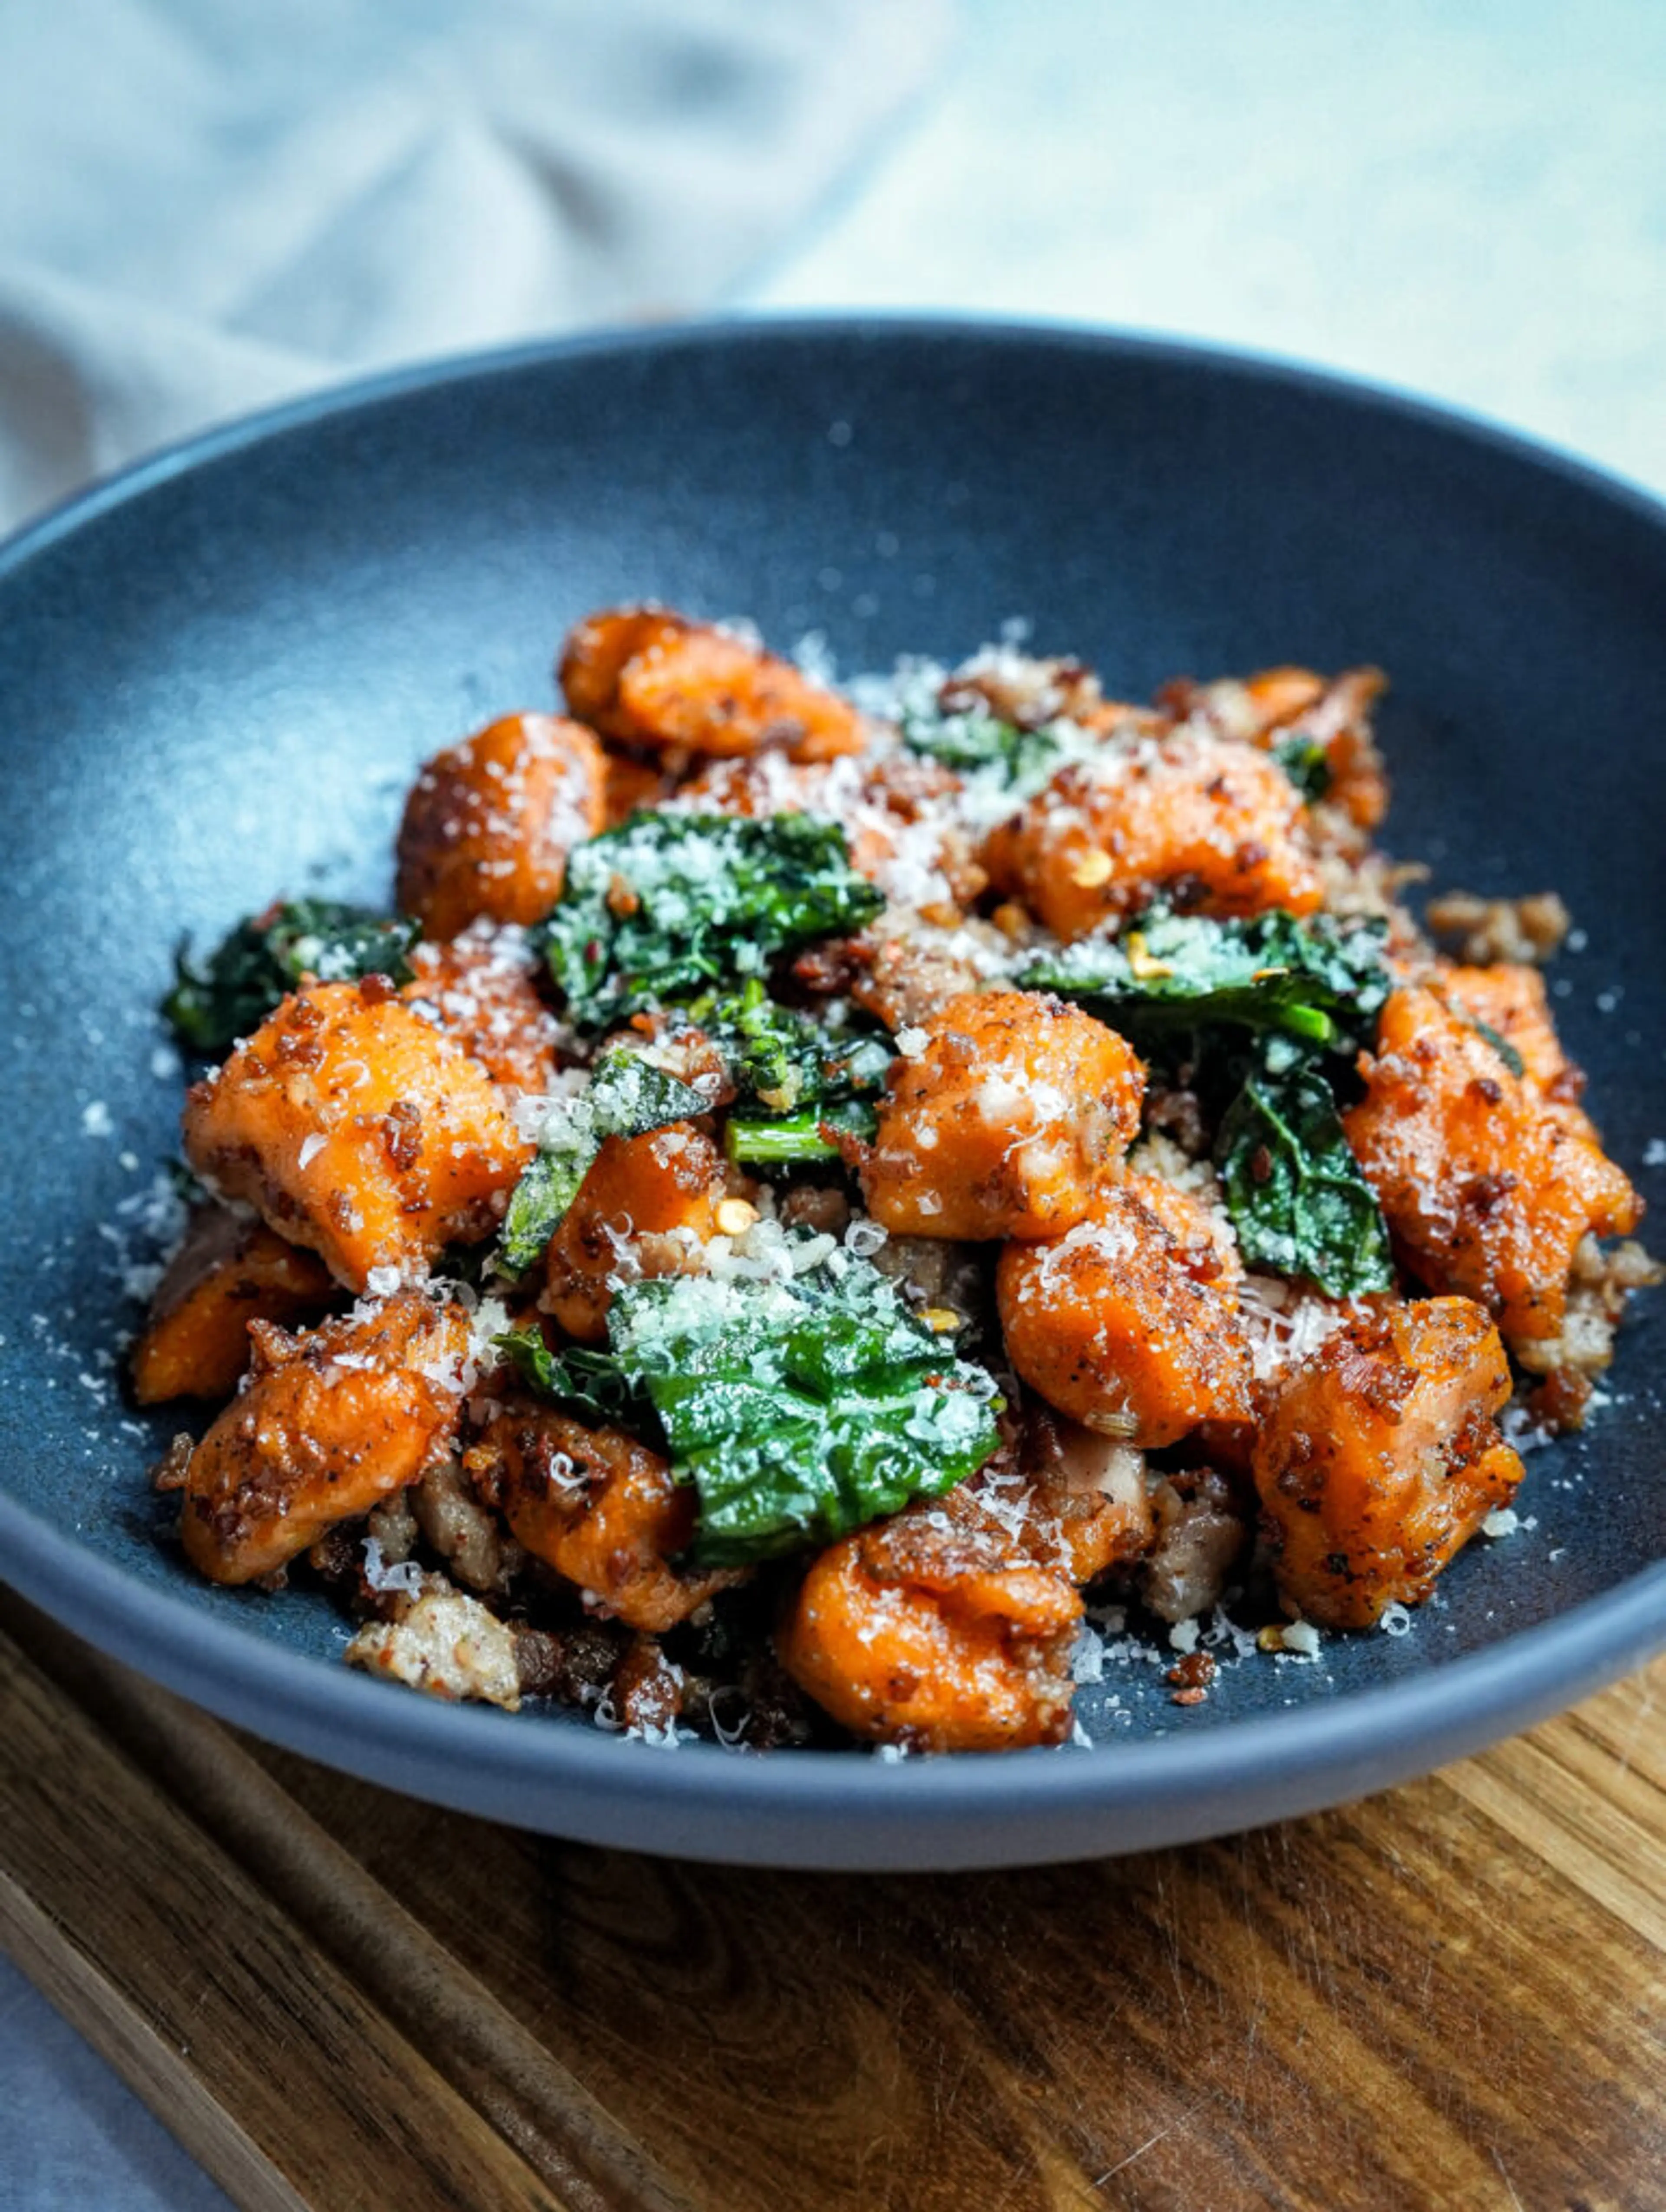 Brown Butter Sweet Potato Gnocchi with Sausage and Kale